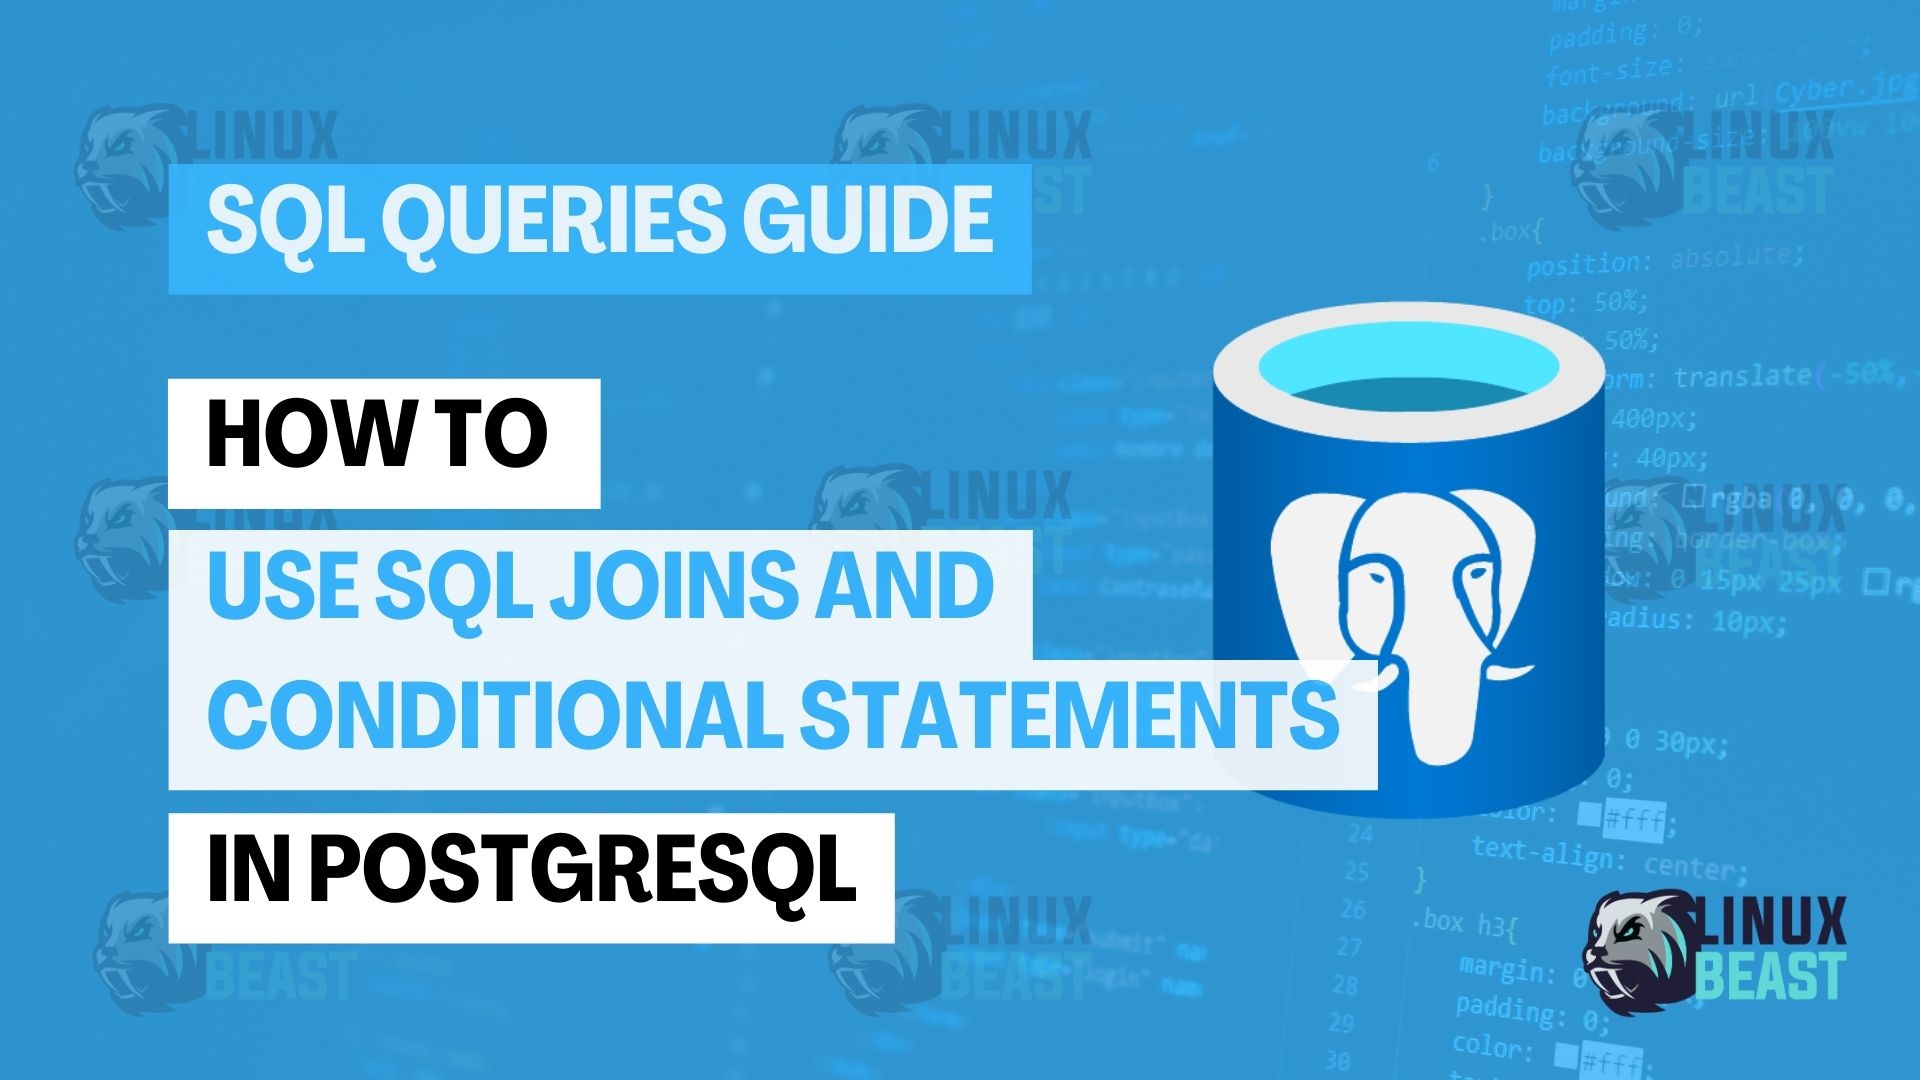 How to Use SQL Joins and Conditional Statements in PostgreSQL